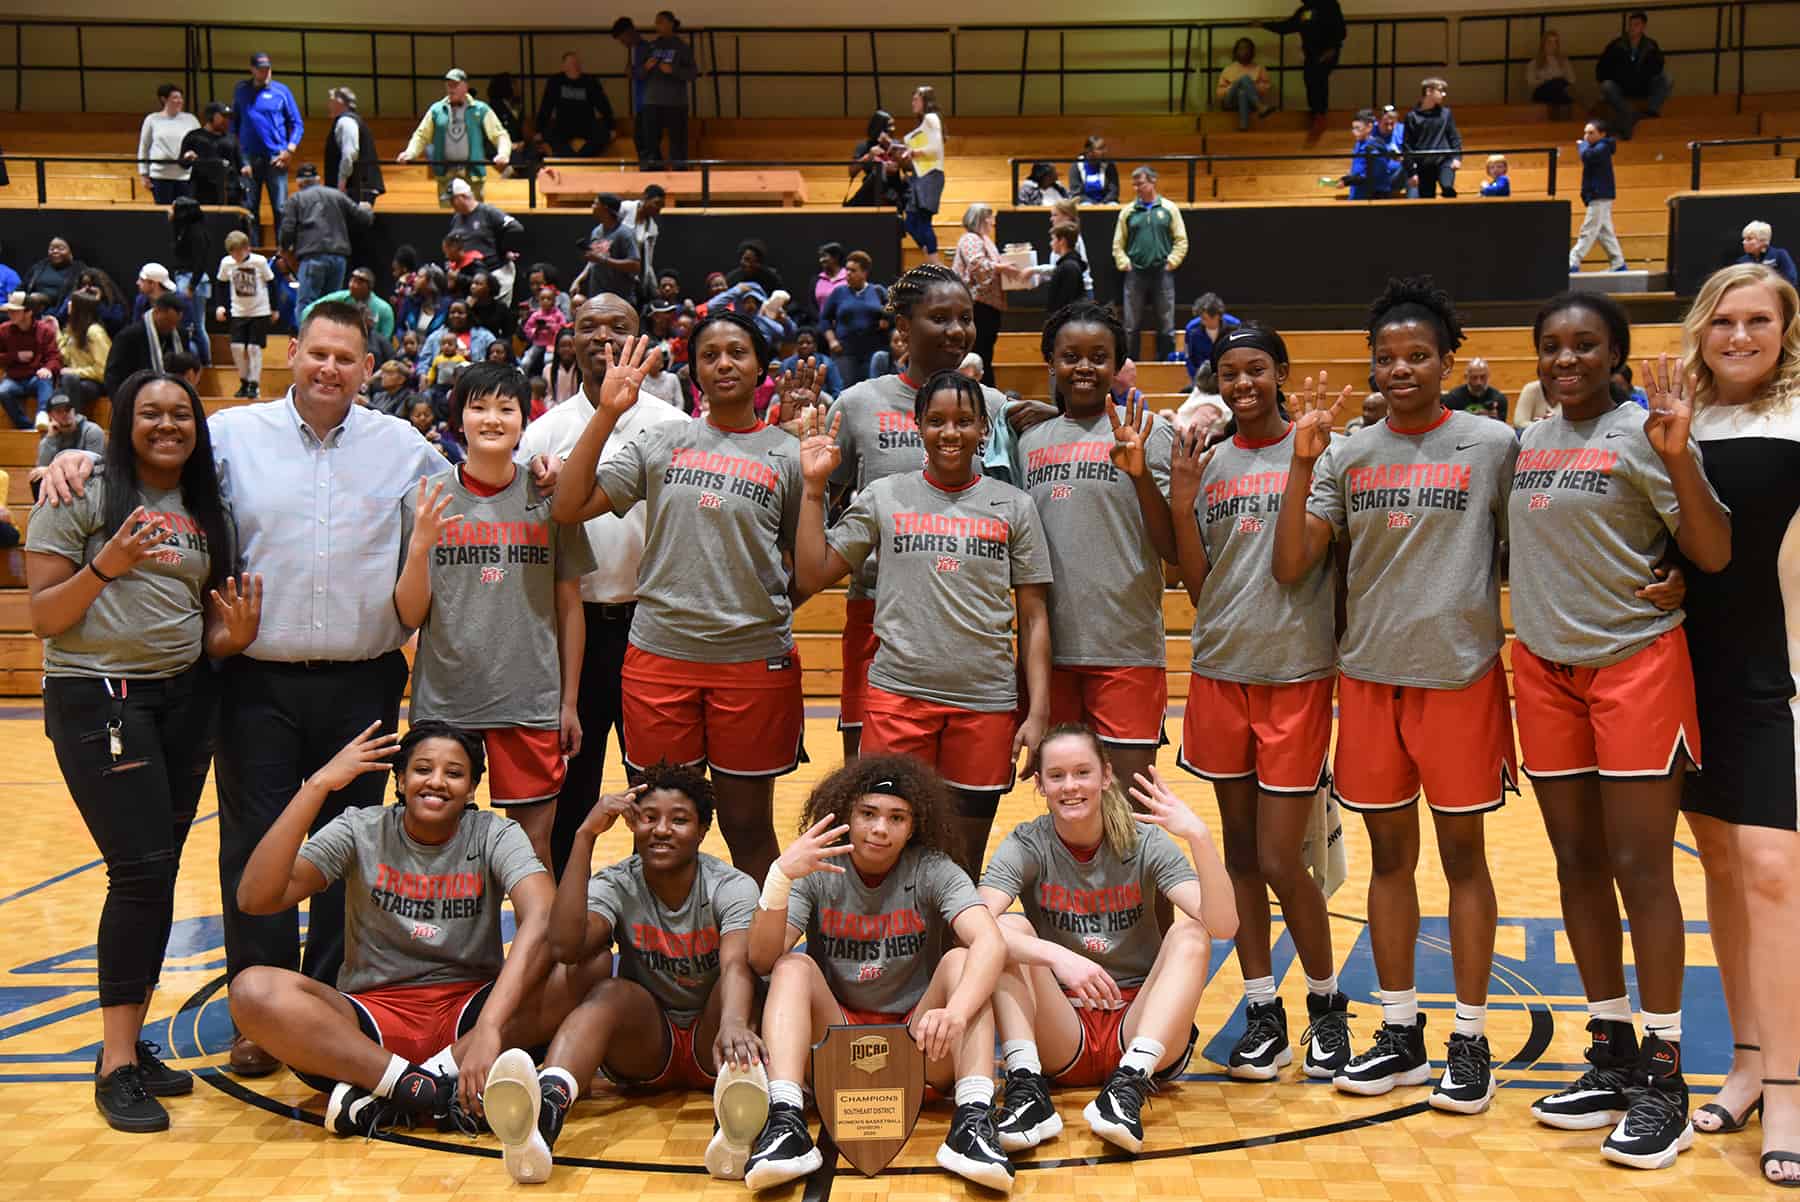 The 2019 – 2020 South Georgia Technical College Lady Jets captured the NJCAA District J Championship title in Spartanburg, SC, in an impressive win over Spartanburg Methodist for their fourth consecutive trip to the NJCAA National Tournament in Lubbock, TX. The tournament has now been cancelled rather than postponed.